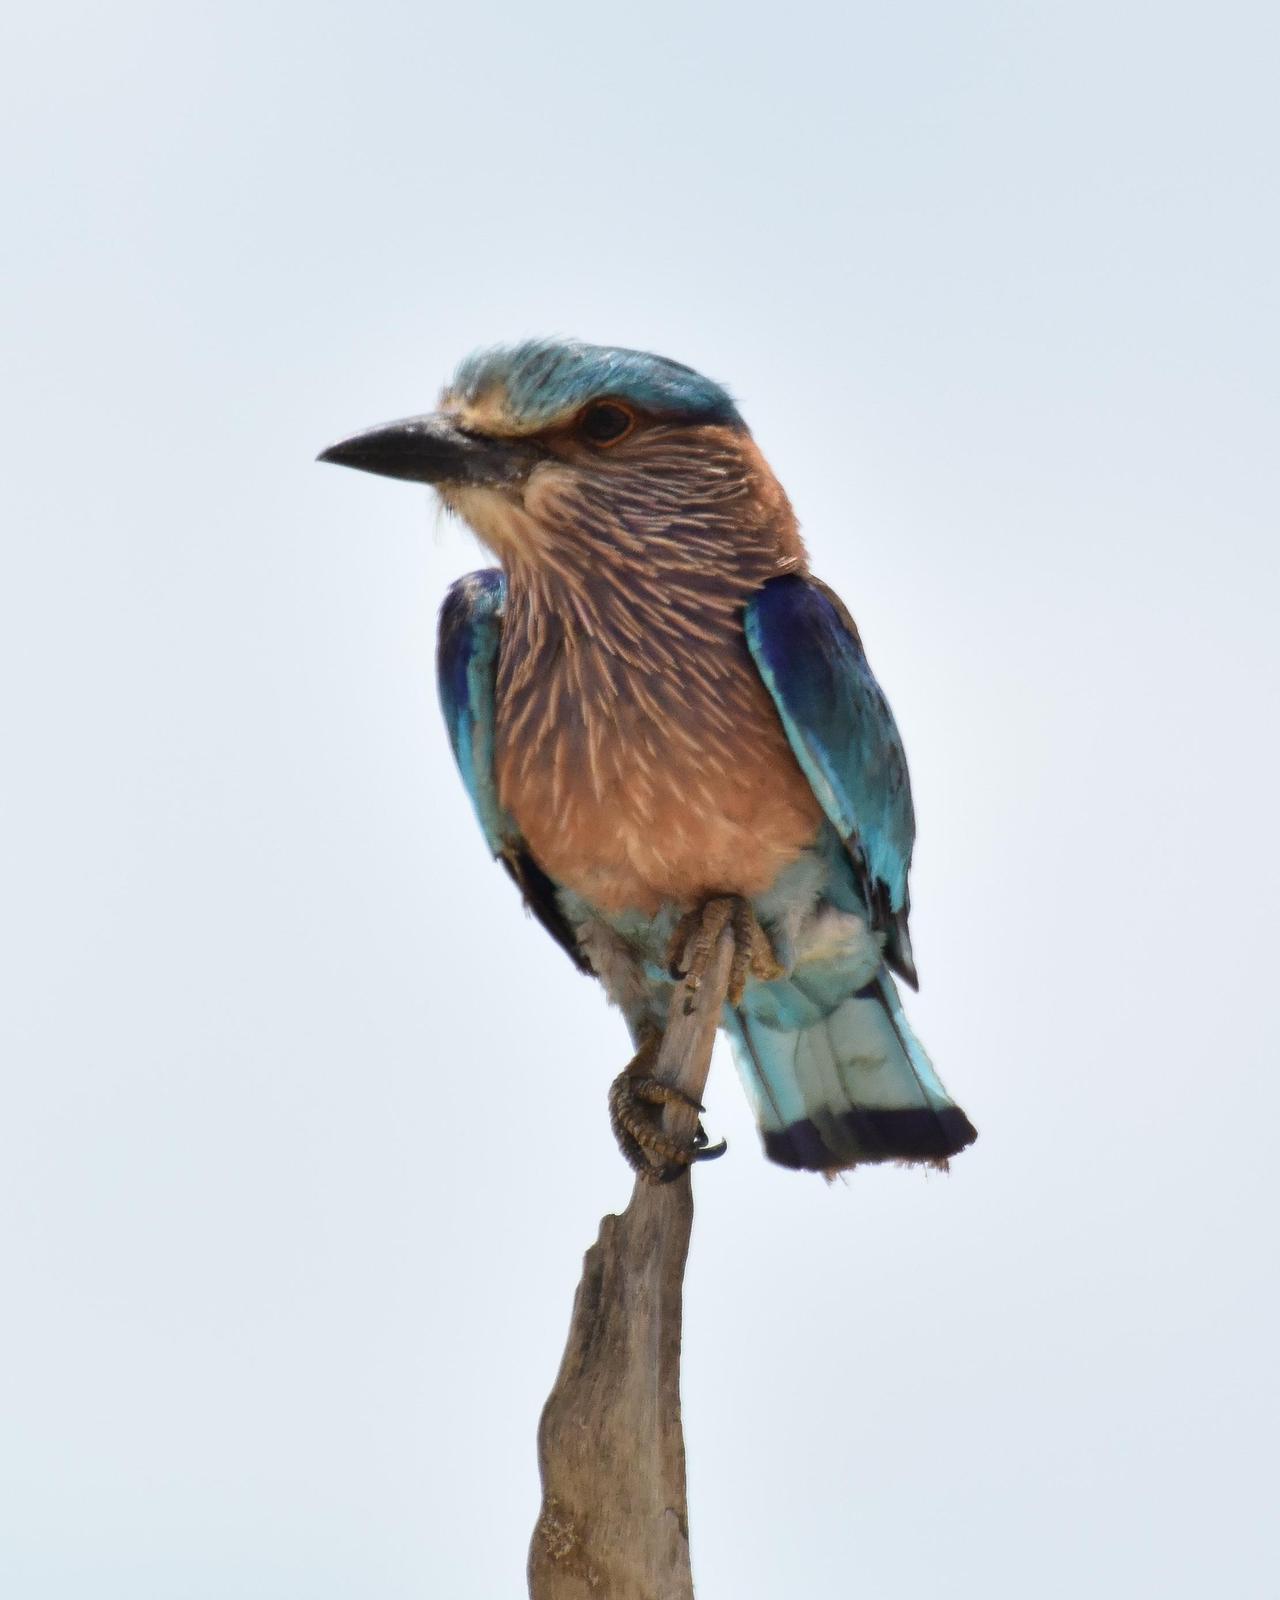 Indian/Indochinese Roller Photo by Steve Percival